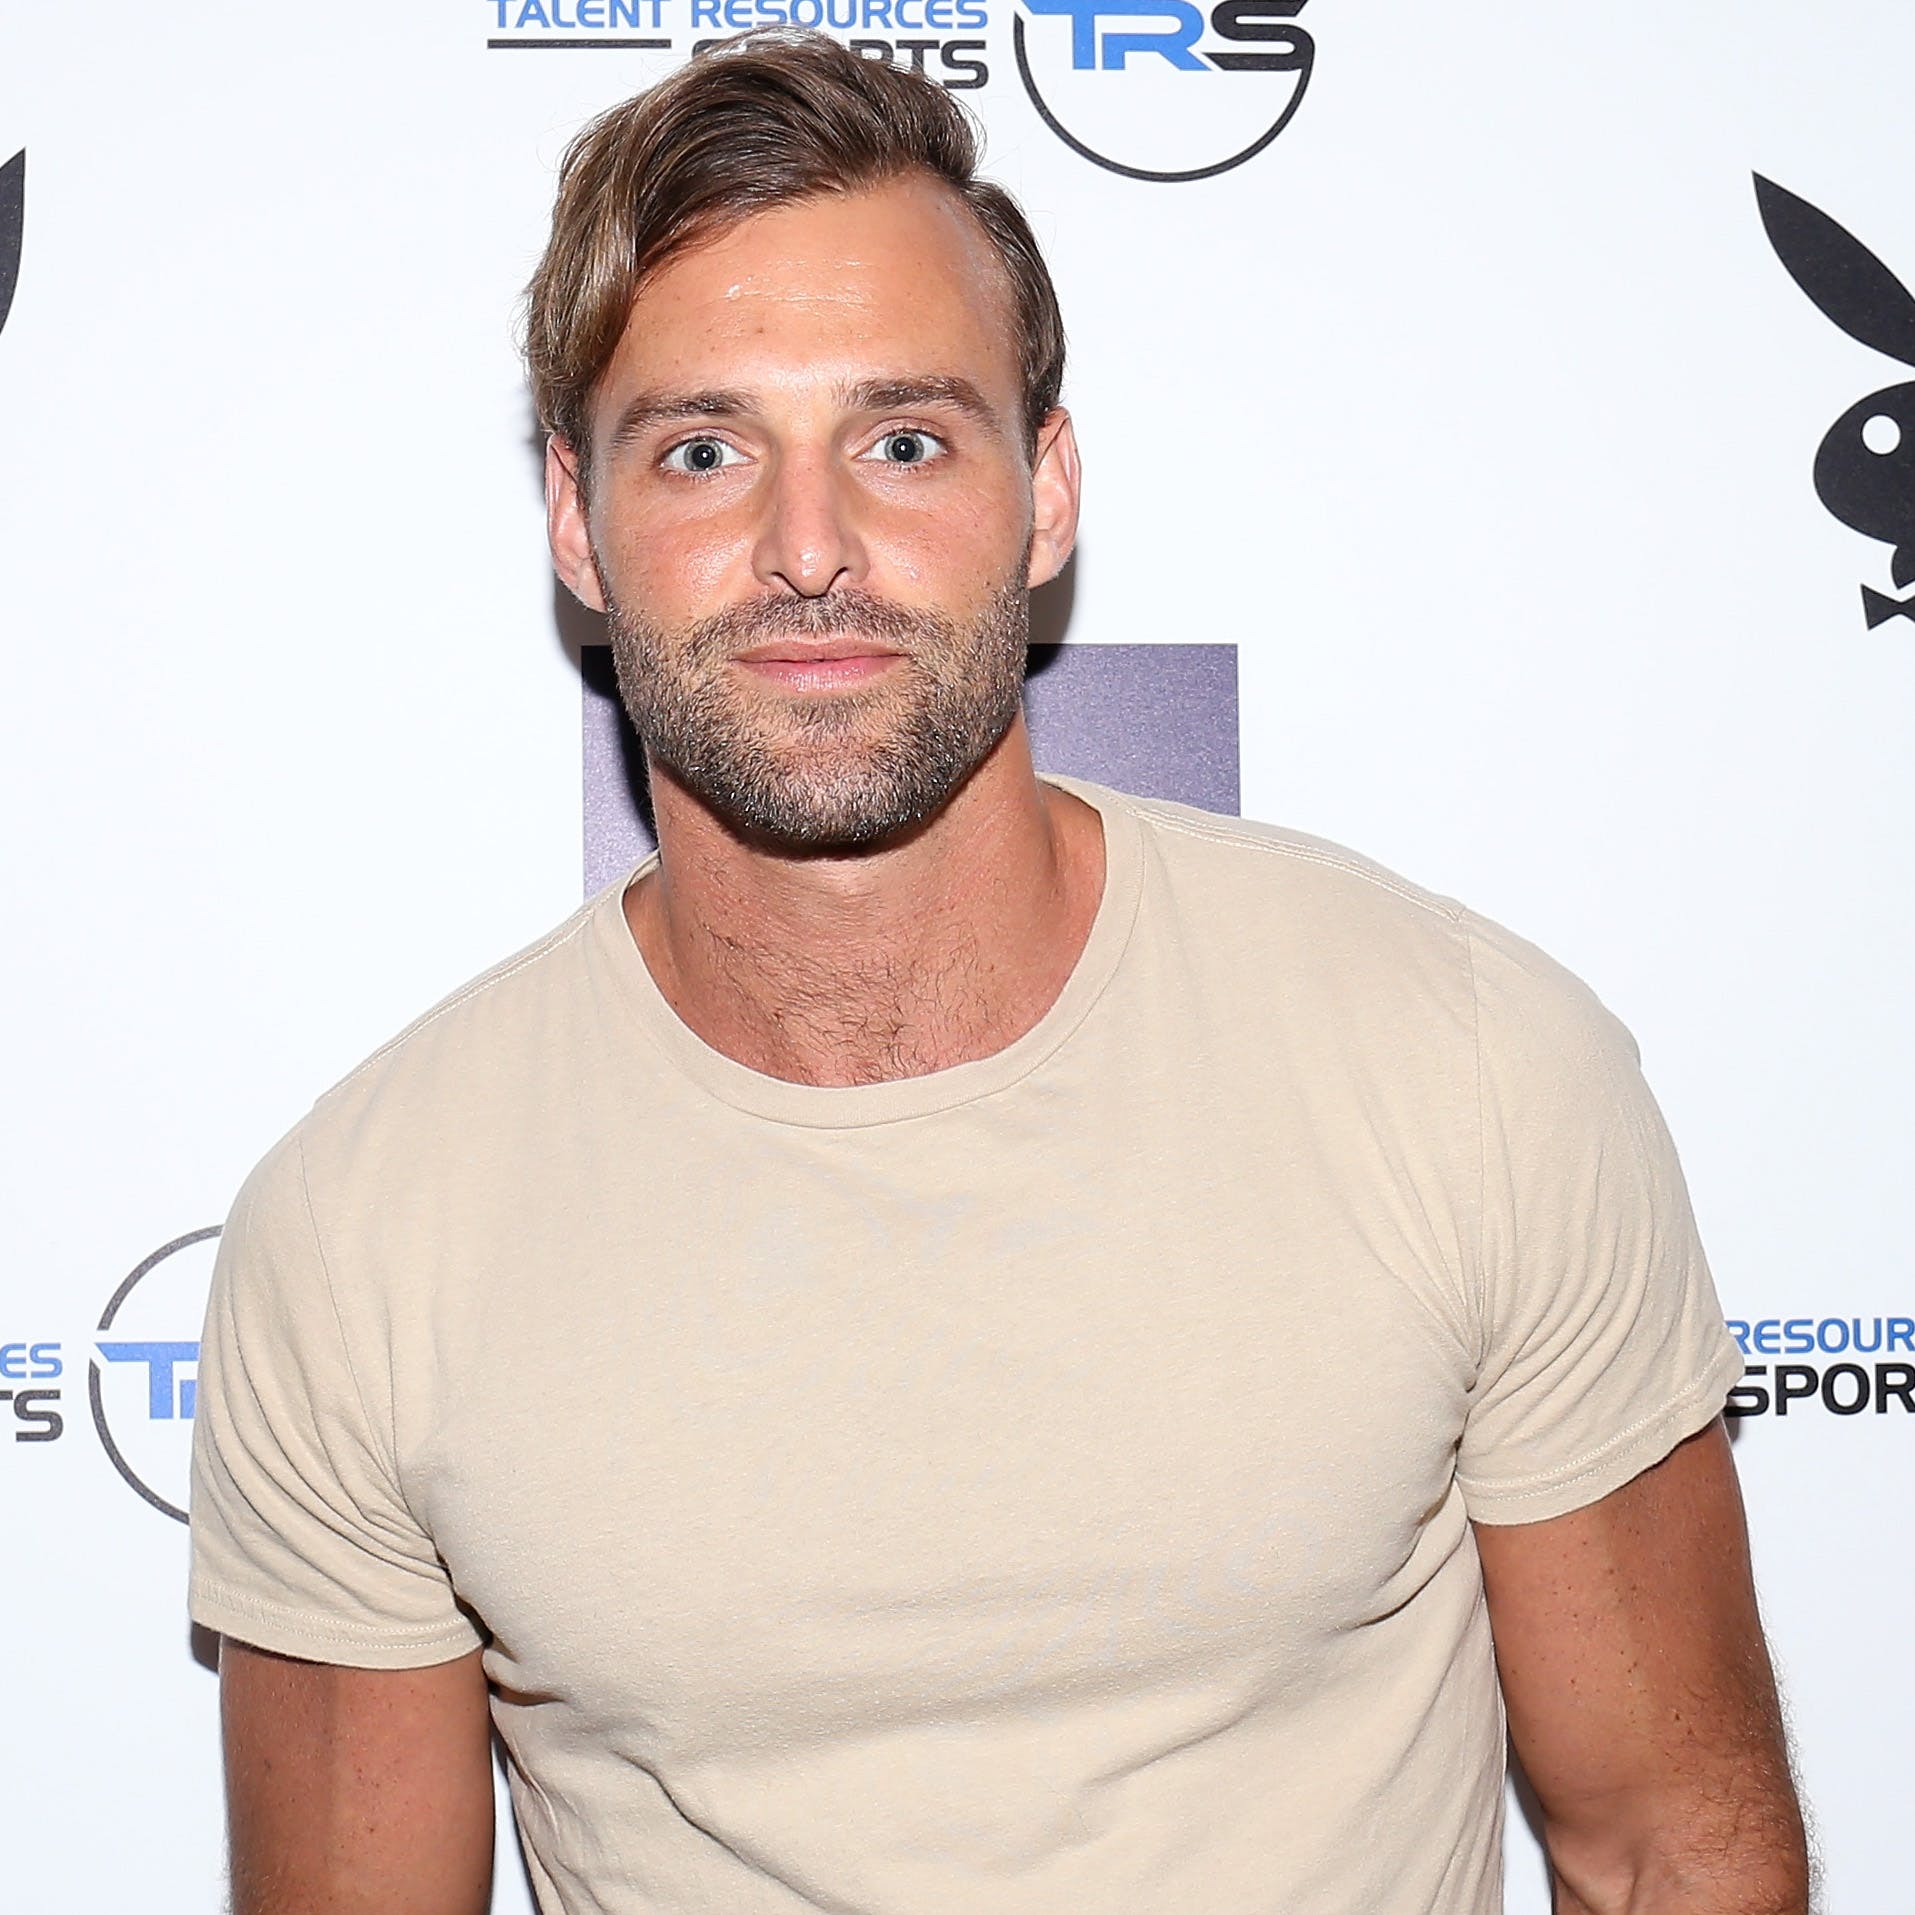 Robby Hayes Bachelor in Paradise, Contestant, Wiki, Bio, Age, Profile, Images, Girlfriend | Full Details